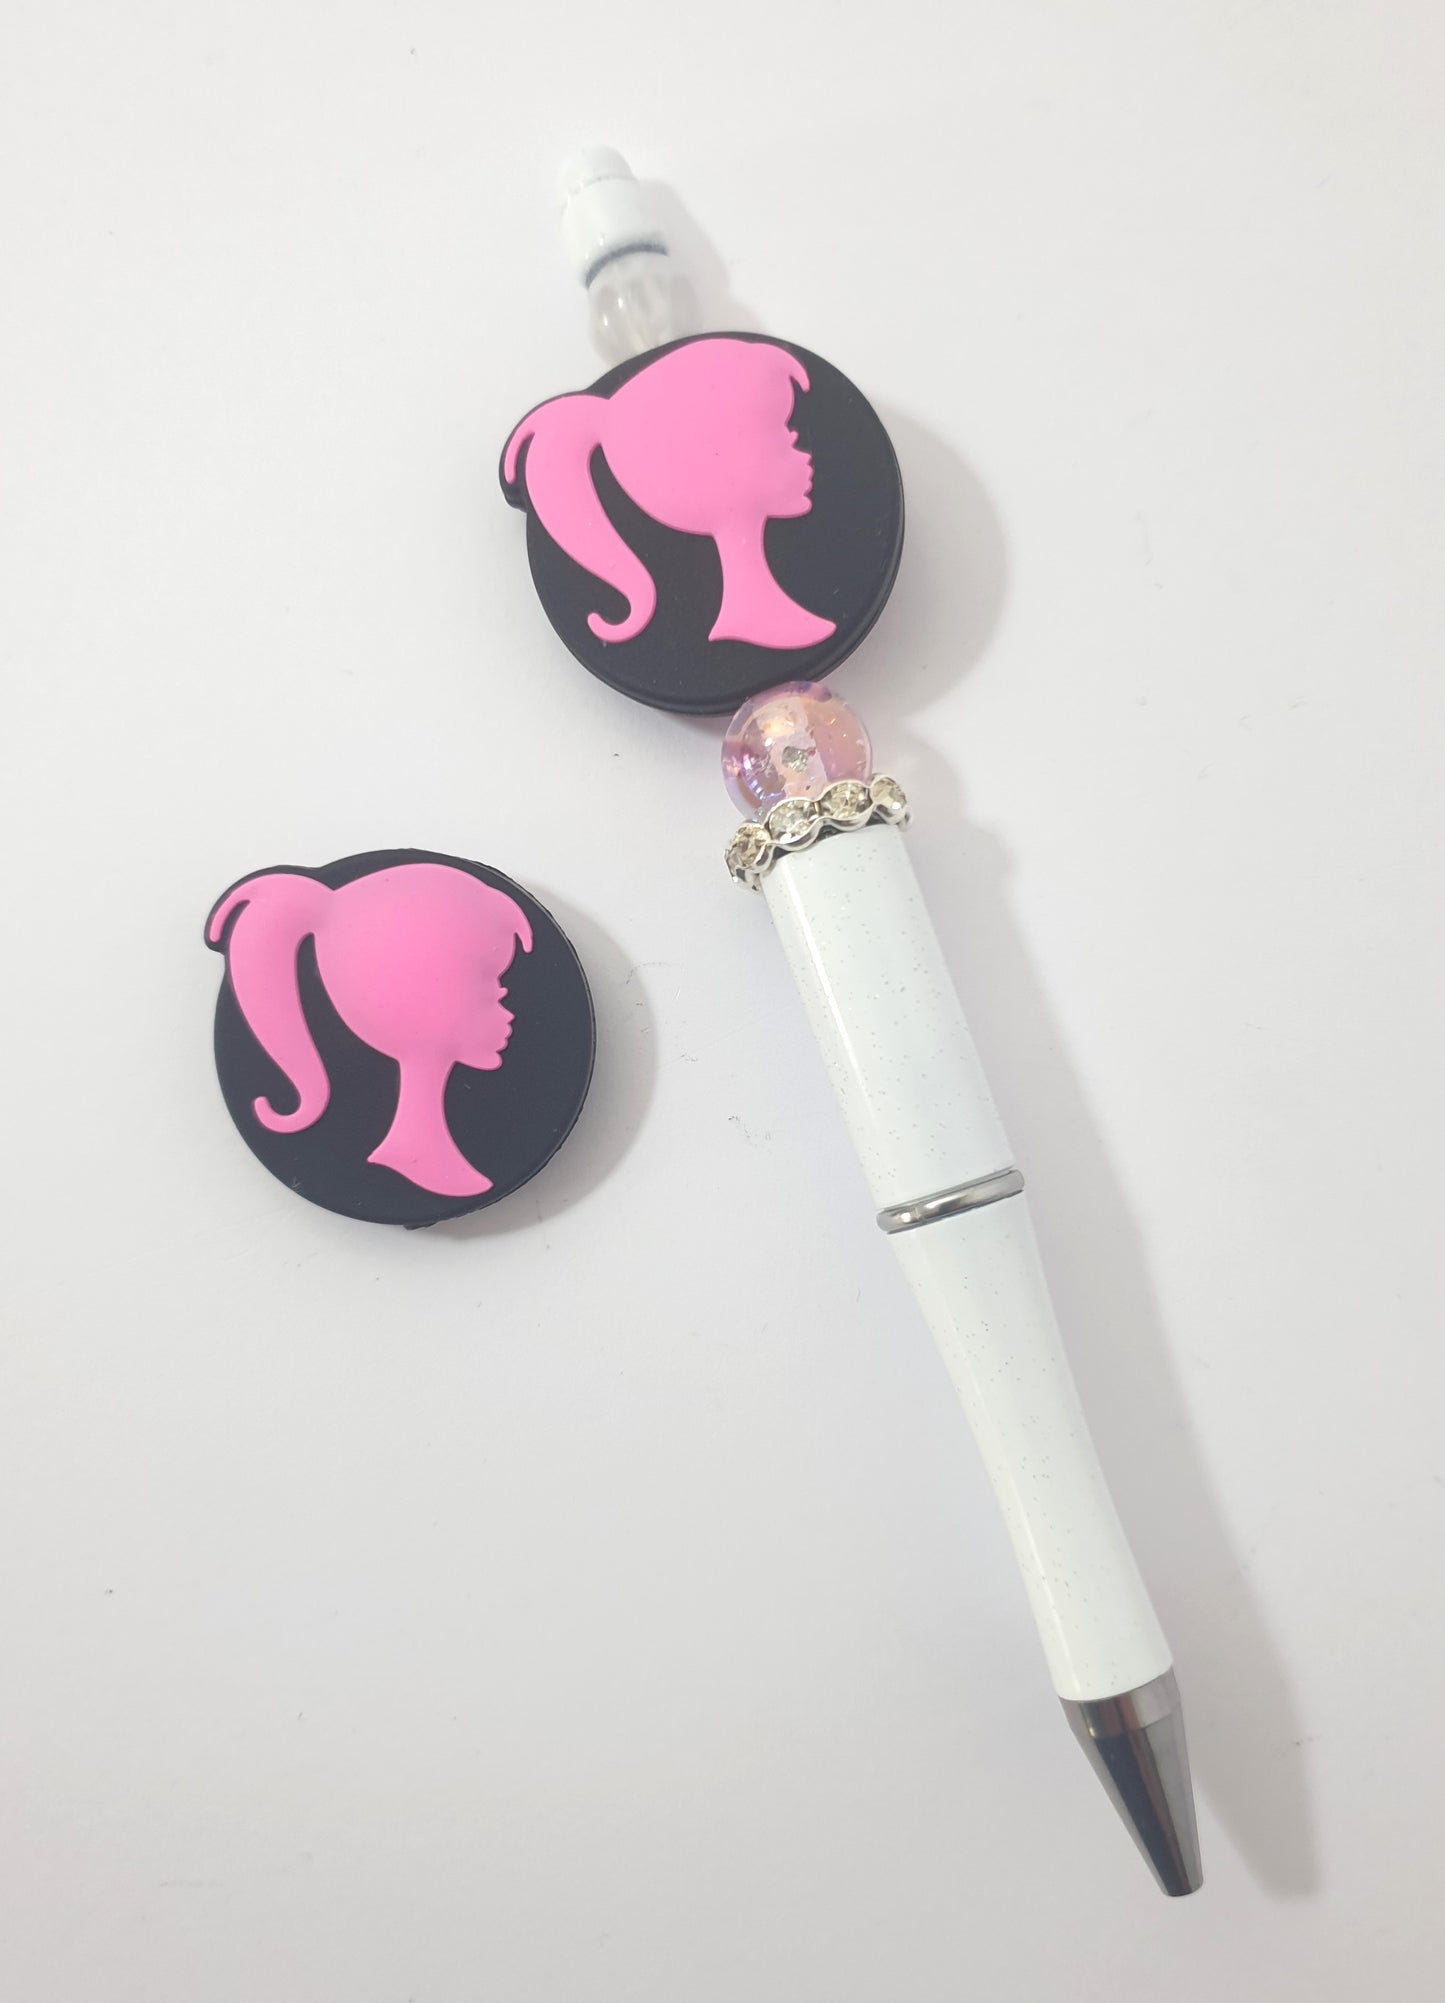 Barbie Pink and Black. Focal Silicone bead. Can fit on pen.